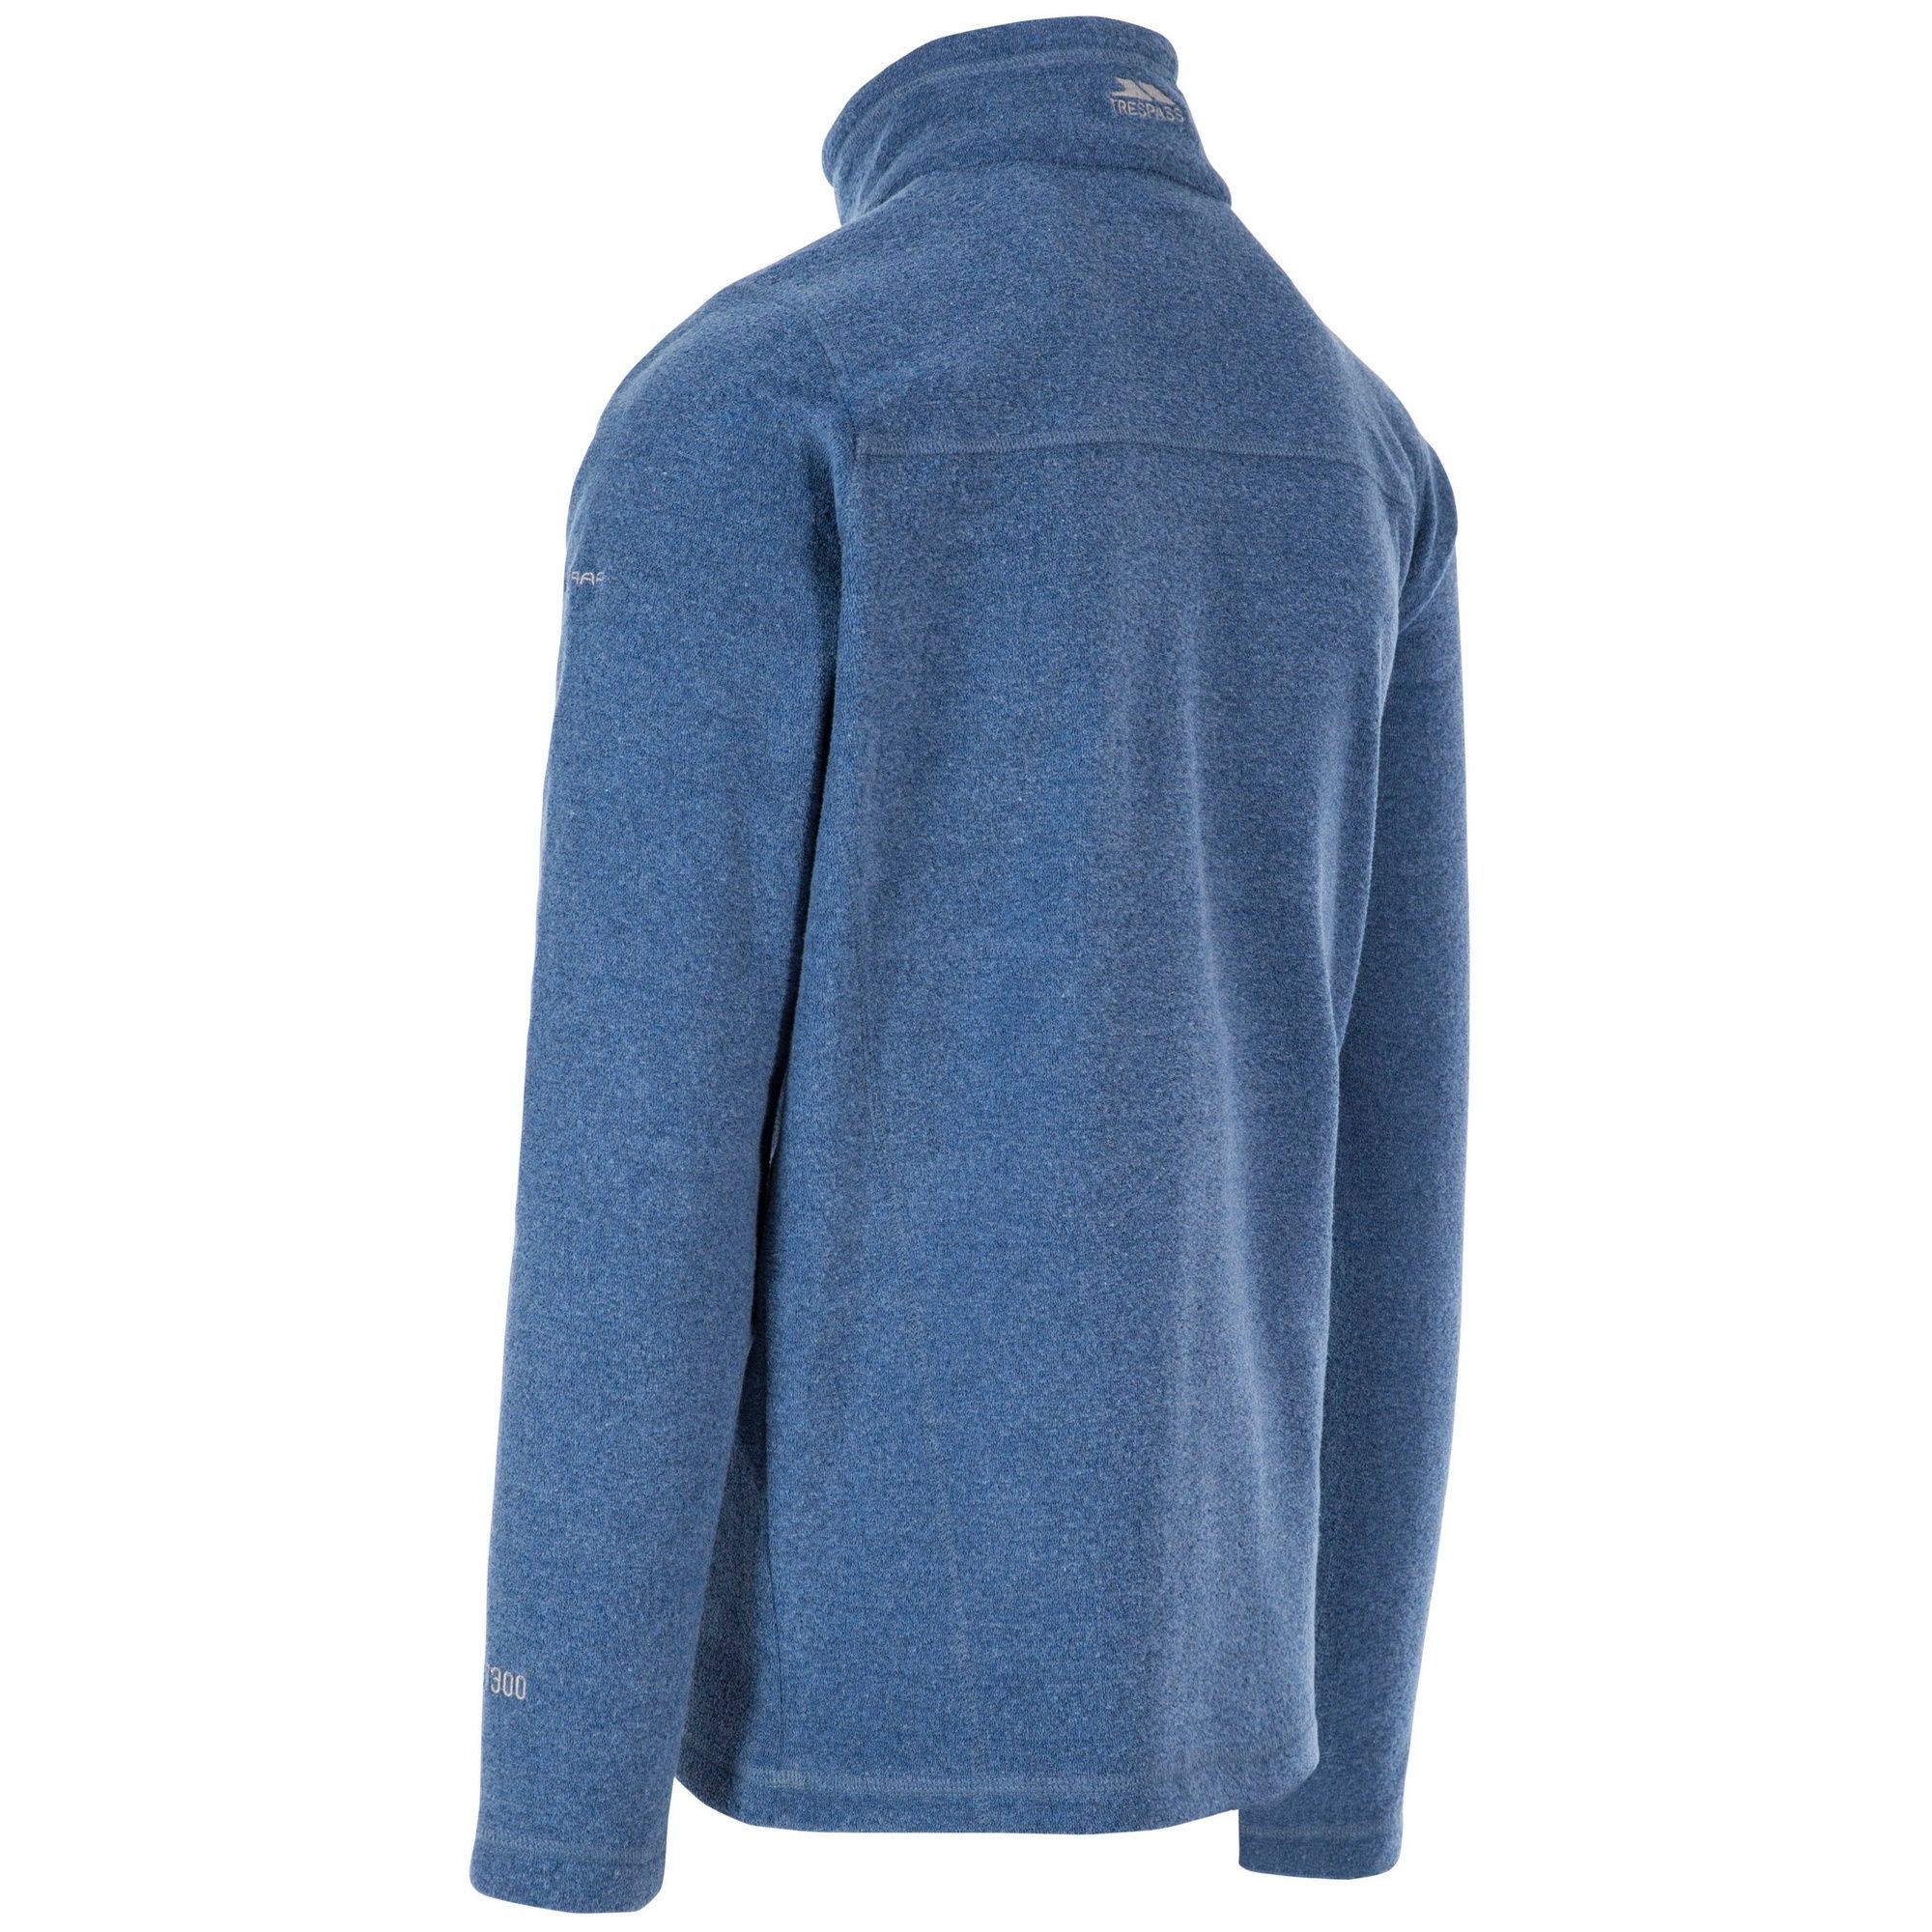 Towelling fleece with brushed back. 1/2 zip neck. Low profile zip. Coverstitch detail. Airtrap. 280gsm. 100% Polyester. Trespass Mens Chest Sizing (approx): S - 35-37in/89-94cm, M - 38-40in/96.5-101.5cm, L - 41-43in/104-109cm, XL - 44-46in/111.5-117cm, XXL - 46-48in/117-122cm, 3XL - 48-50in/122-127cm.p. Coverstitch detail. Airtrap. 280gsm. 100% Polyester.